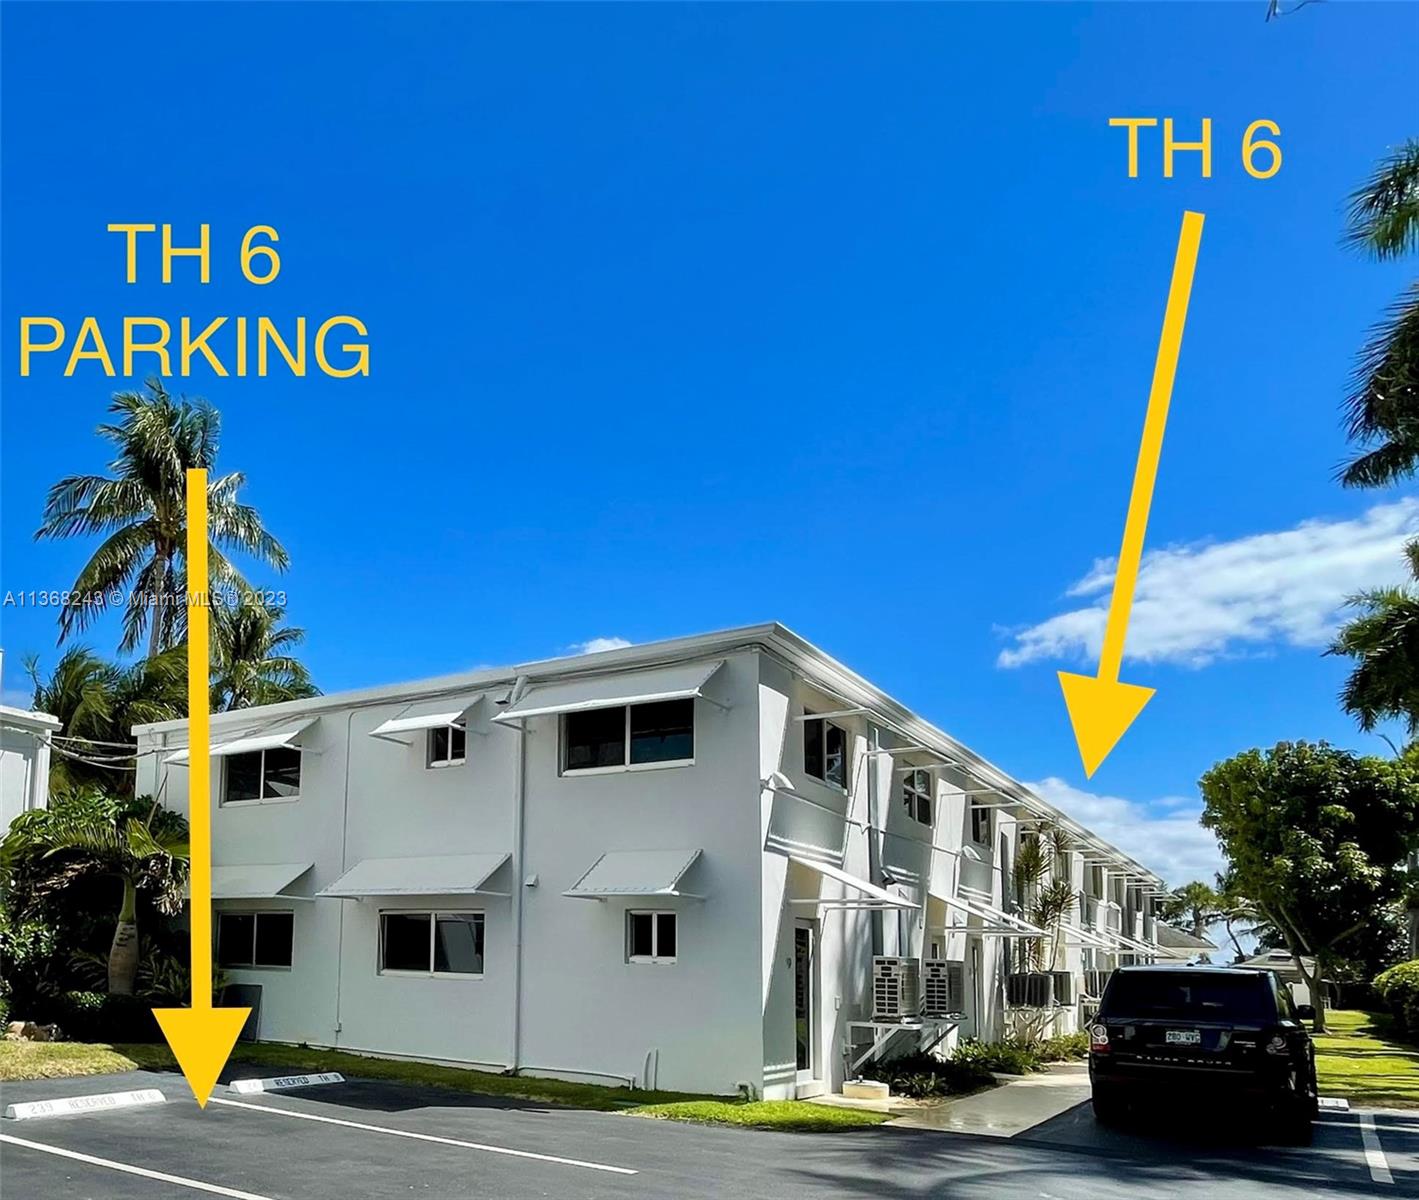 Best location with best parking spot very close to the unit! South facing entrance offers best sun exposure!